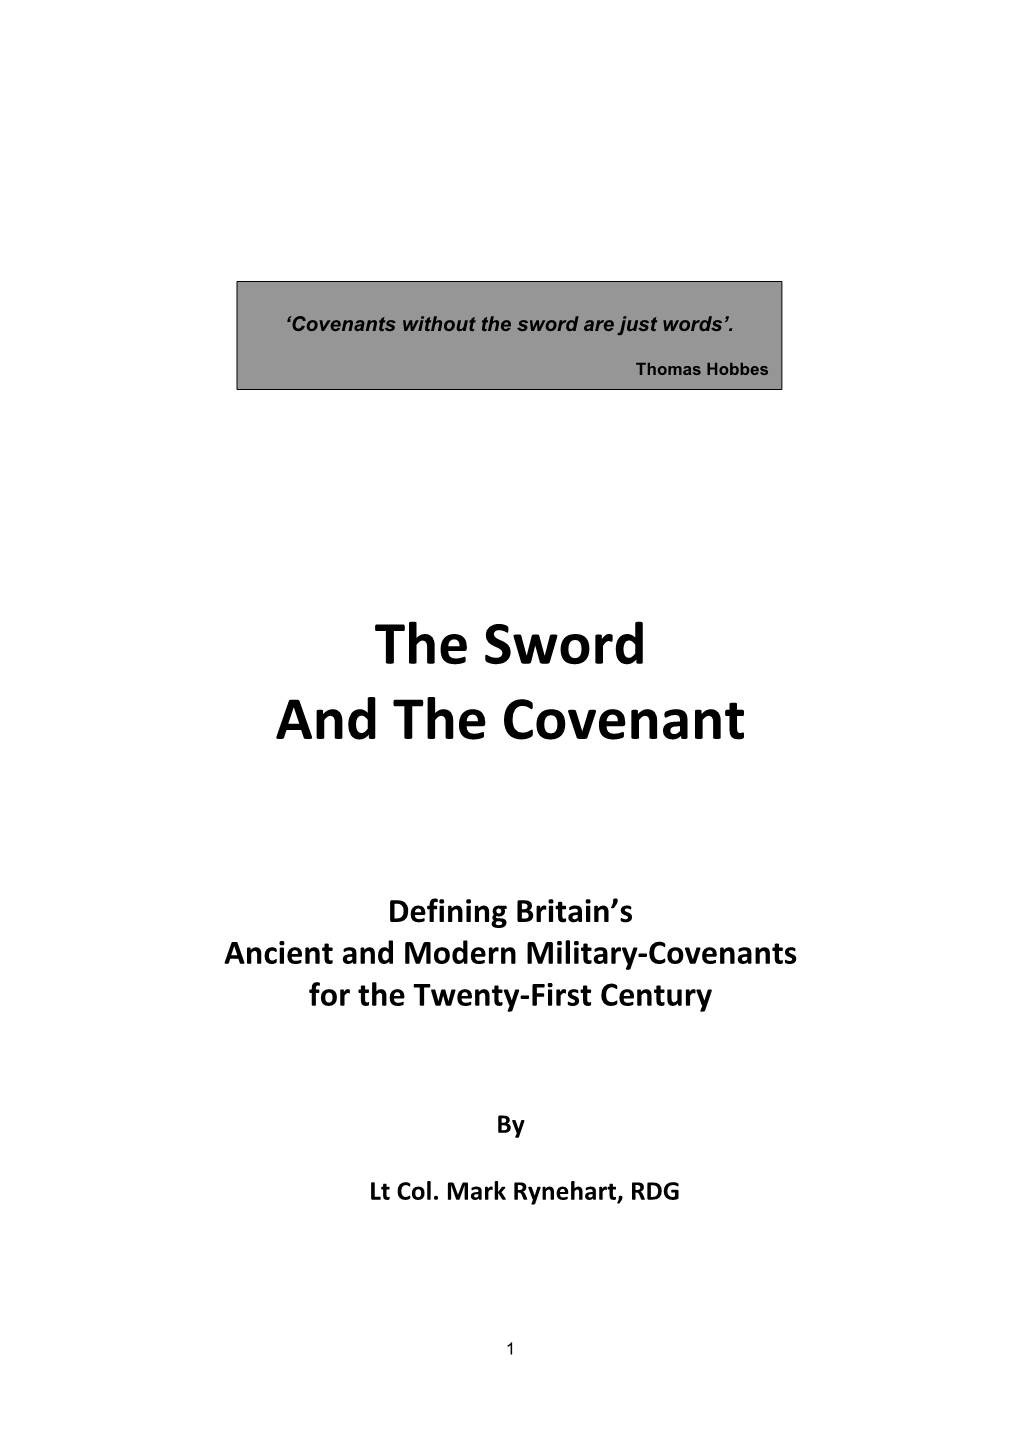 The Sword and the Covenant